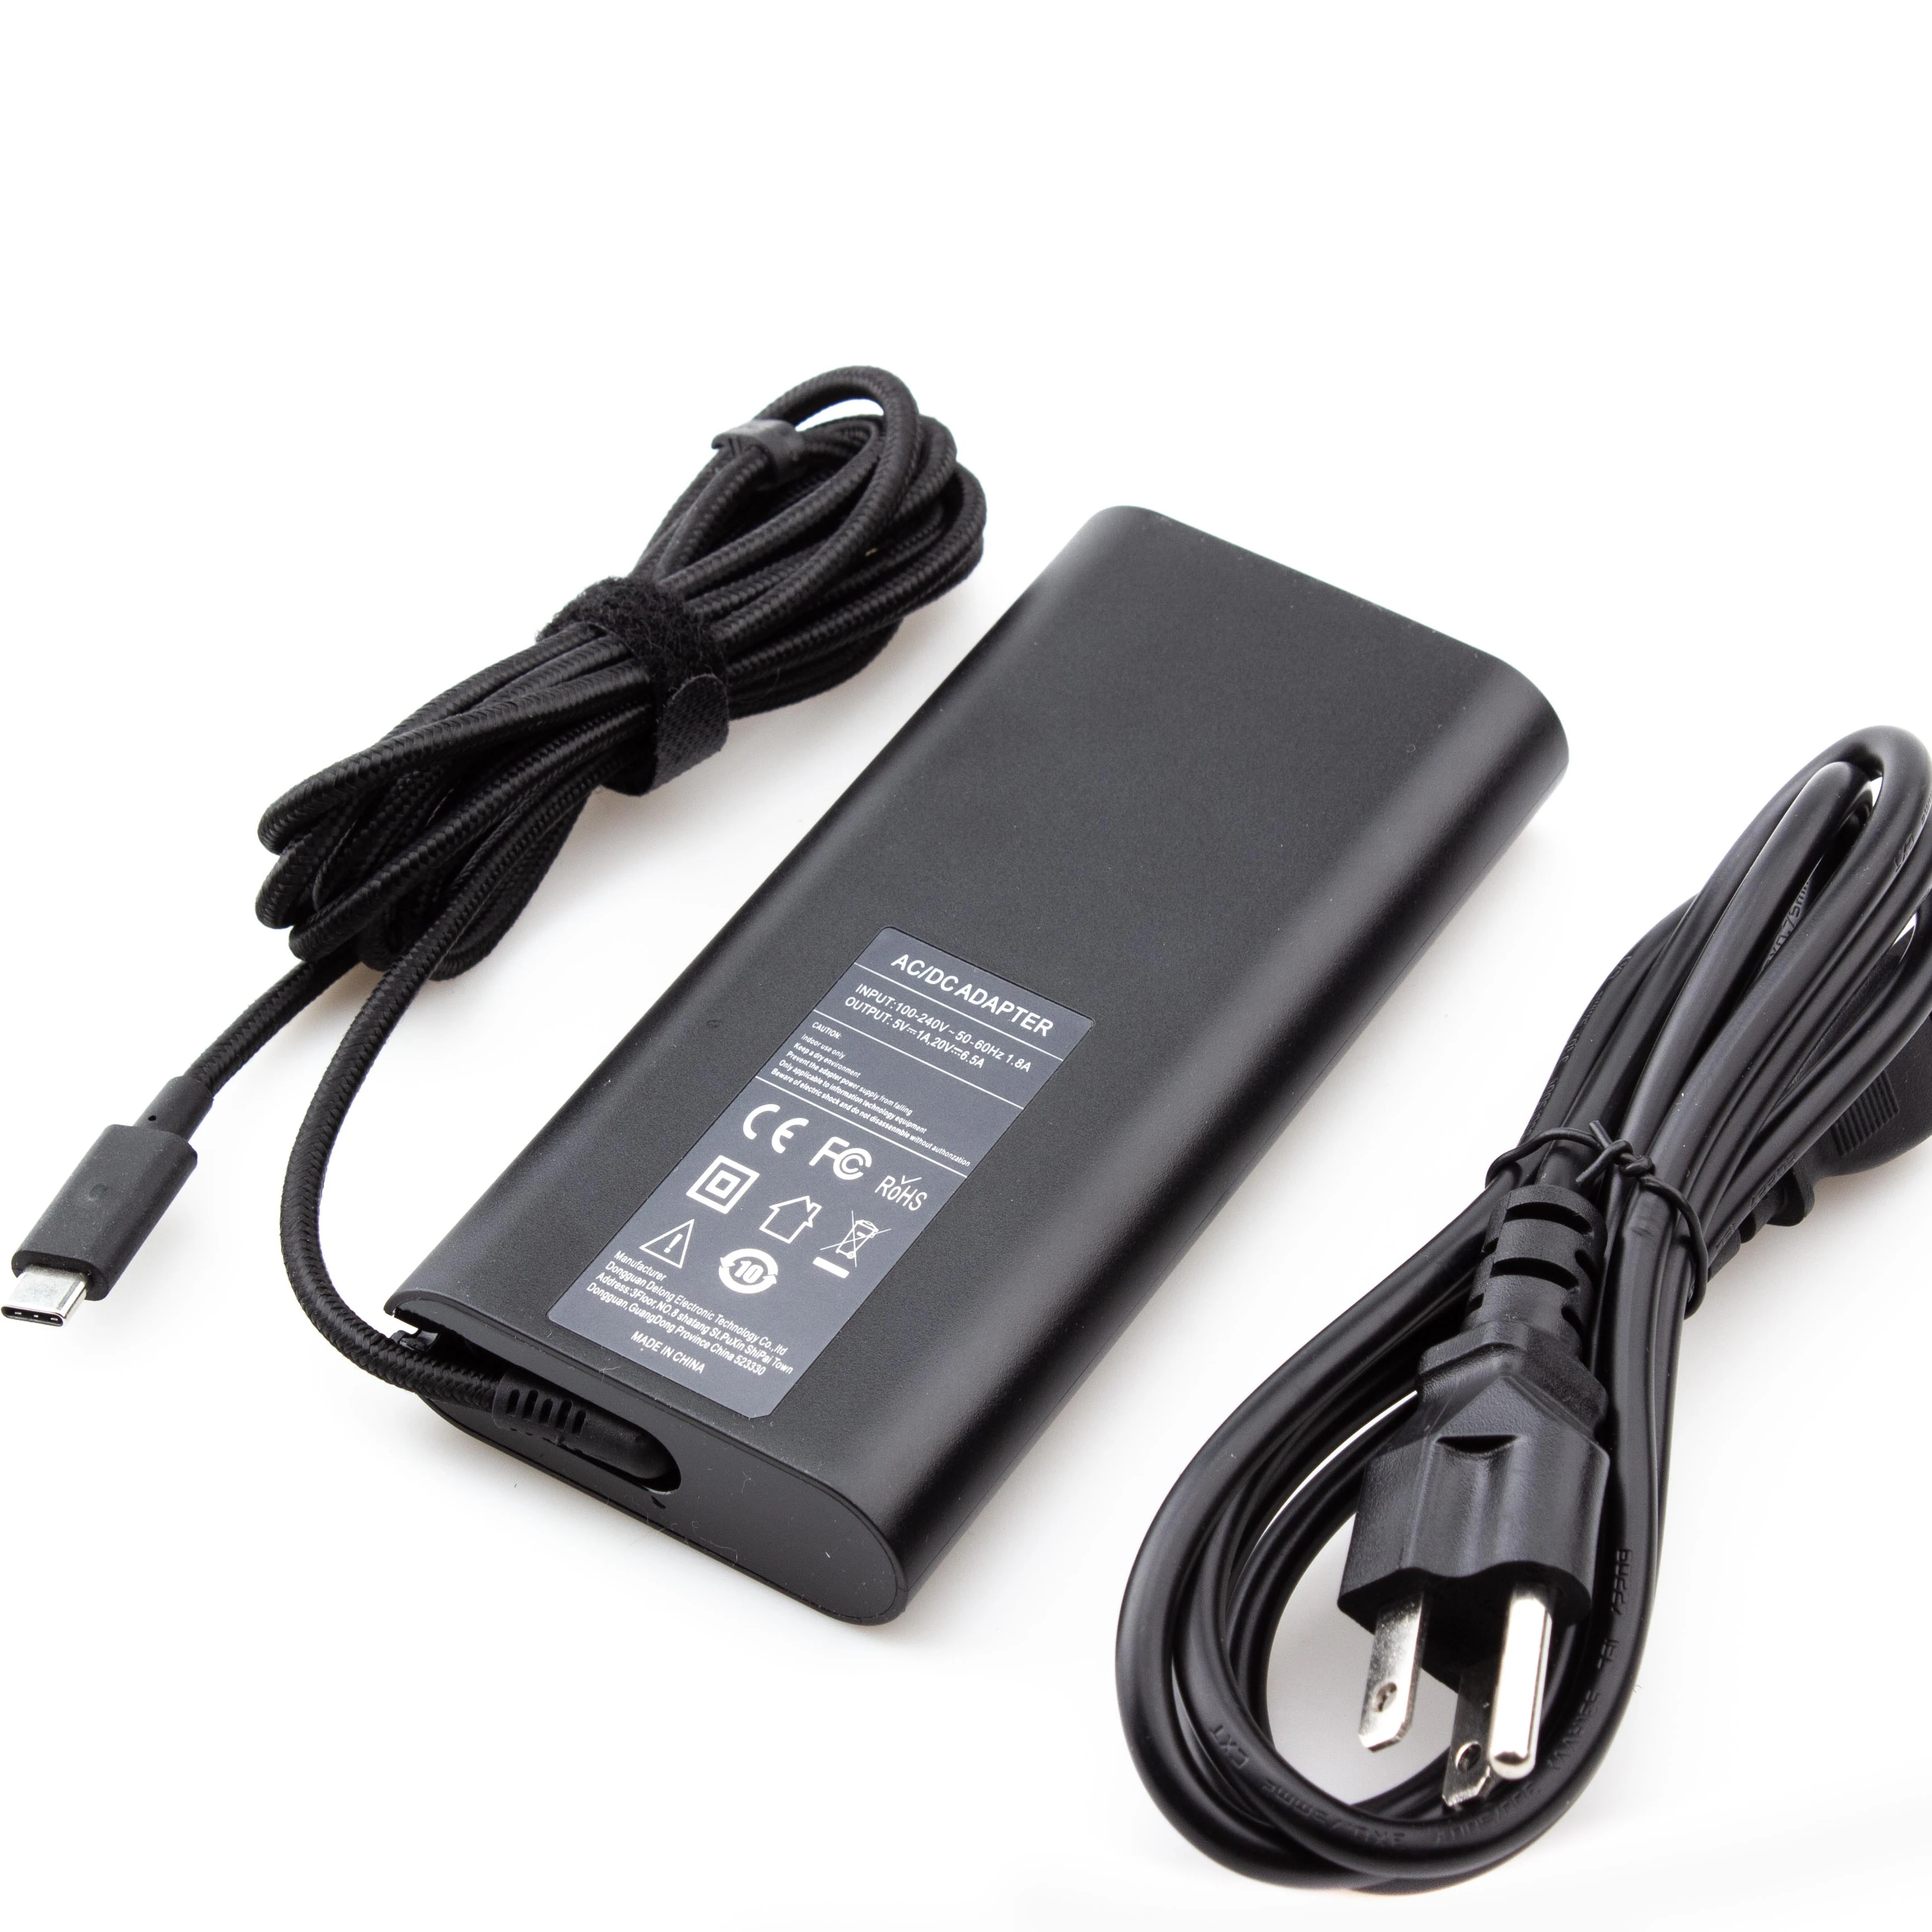 ontwikkelen Uitgaven Ophef 130w Charger Power Supply Type C Usb C Laptop Charger For Laptop Adapter  Dell Xps 15 9575 9500 17 9700 - Buy Da130pm170,Ha130pm170,Xps 15 Charger  Product on Alibaba.com